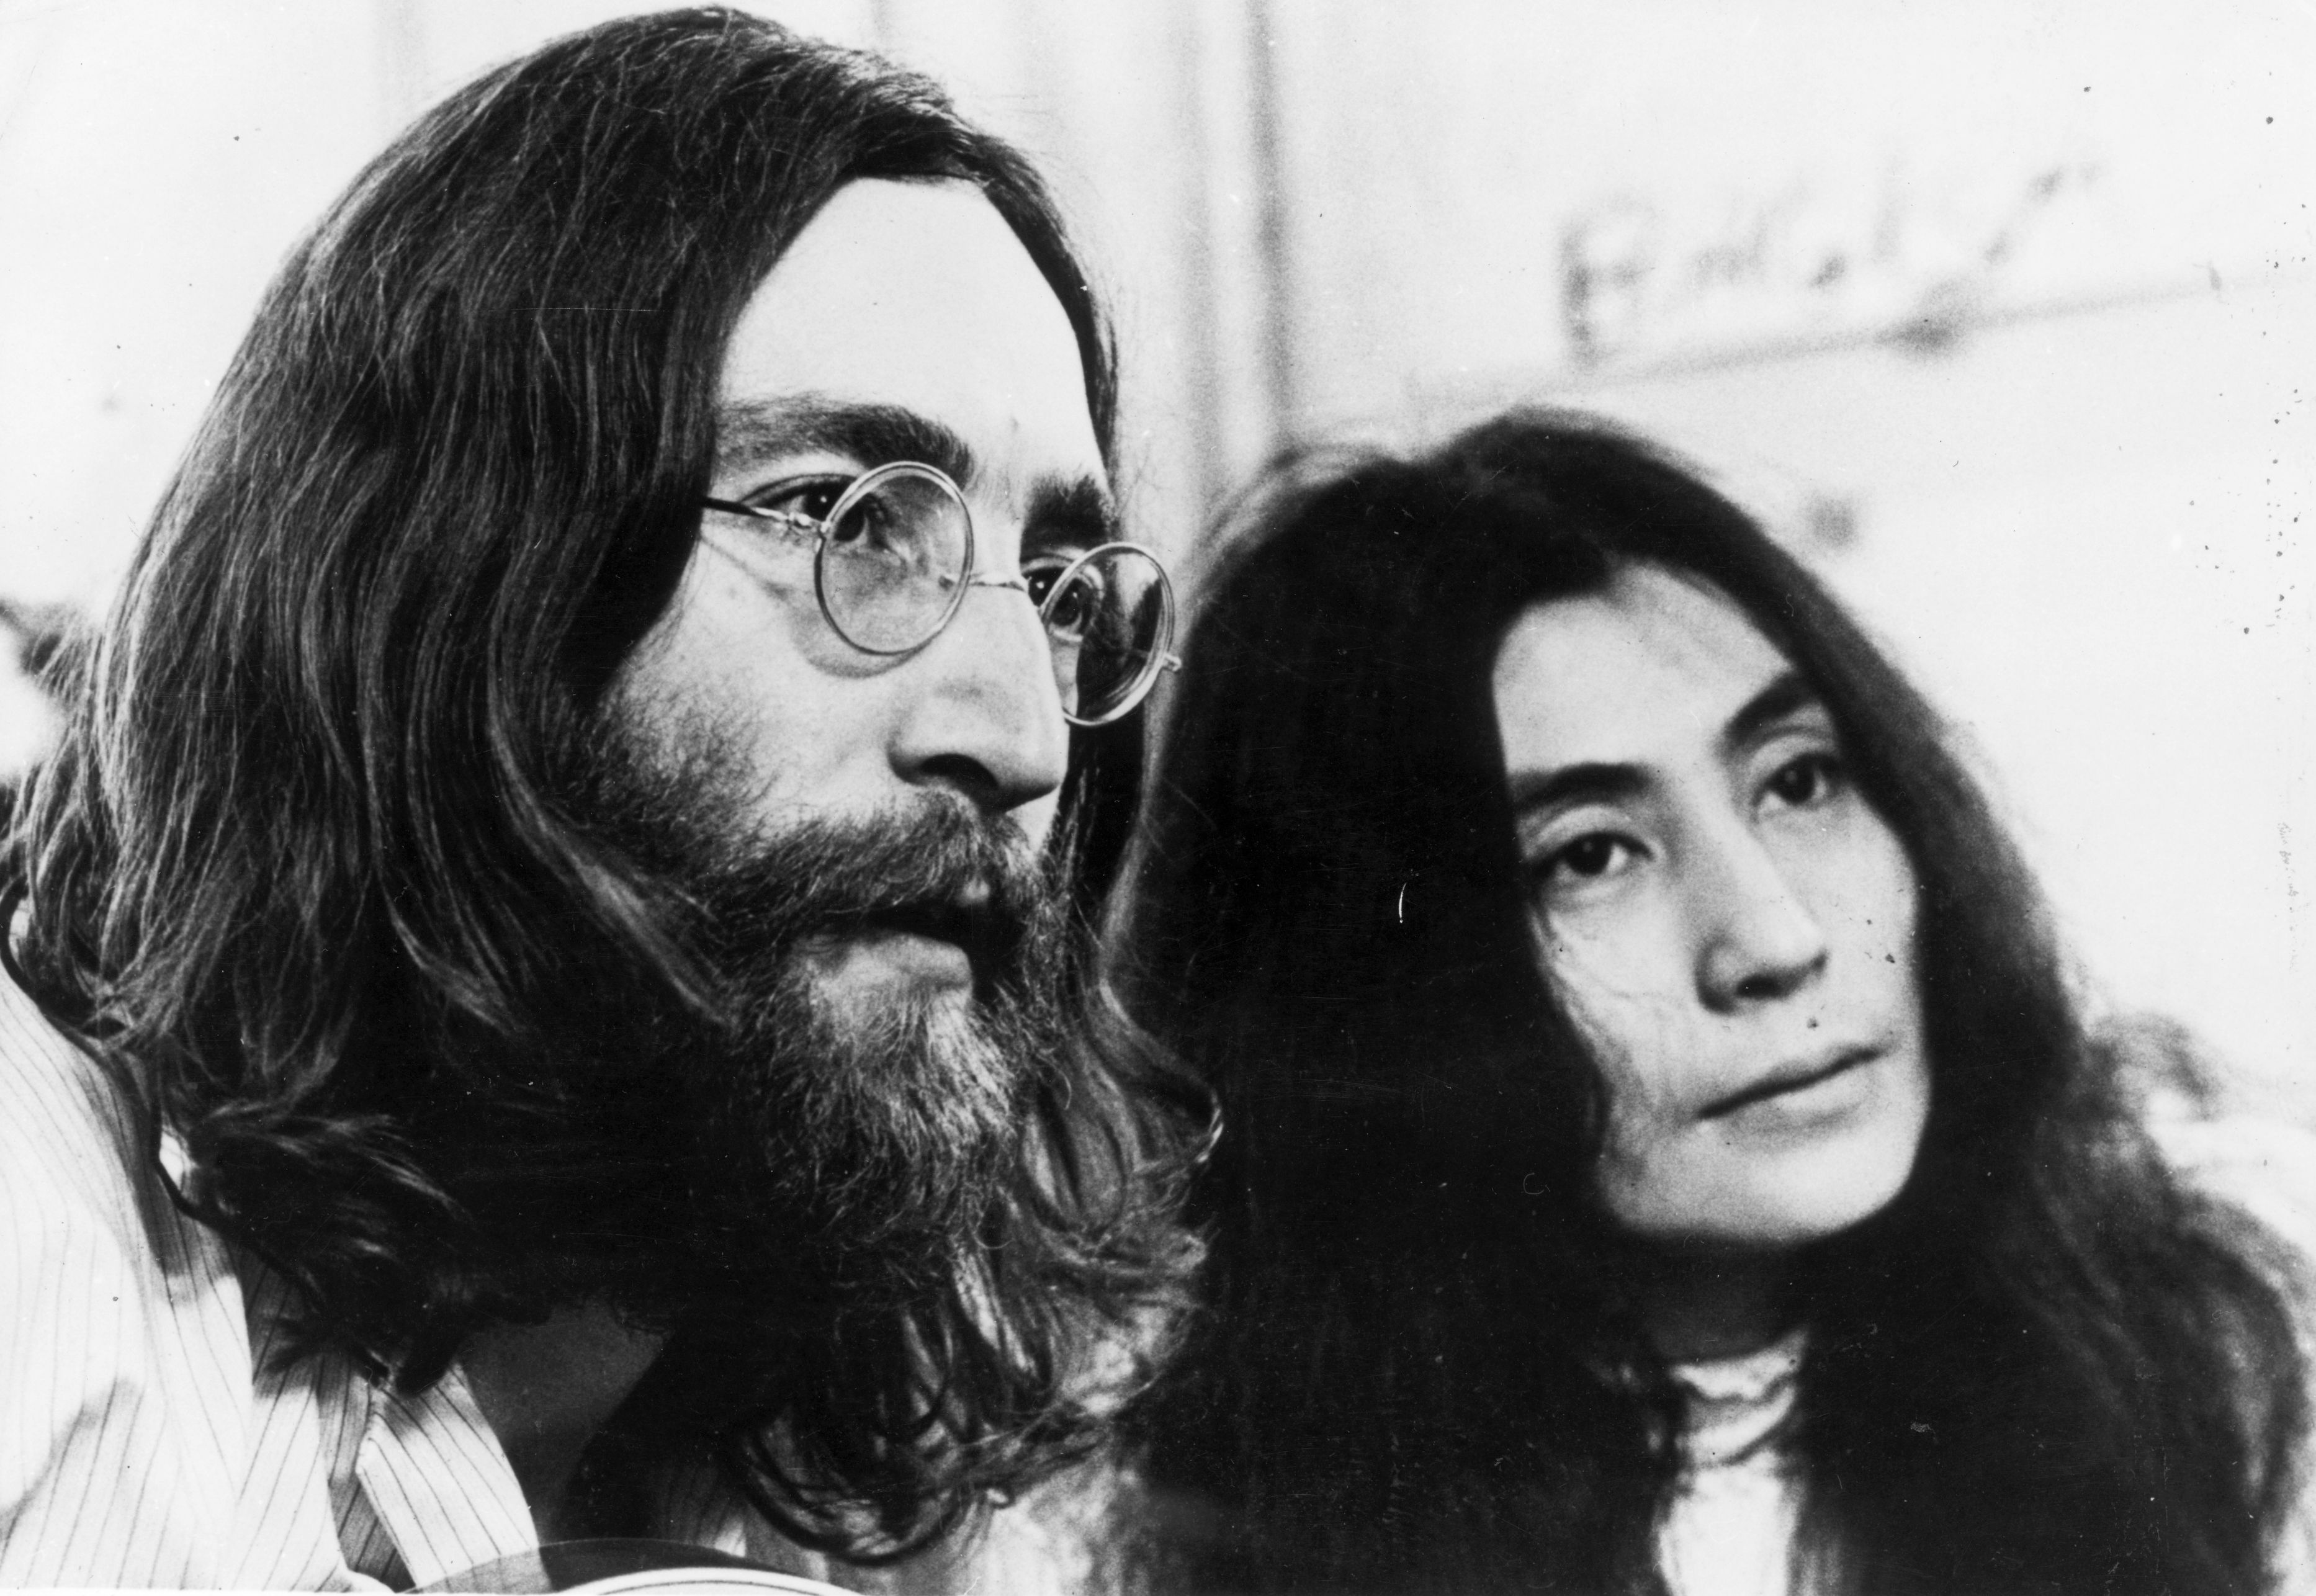 John Lennon and Yoko Ono listening to playback of their tapes